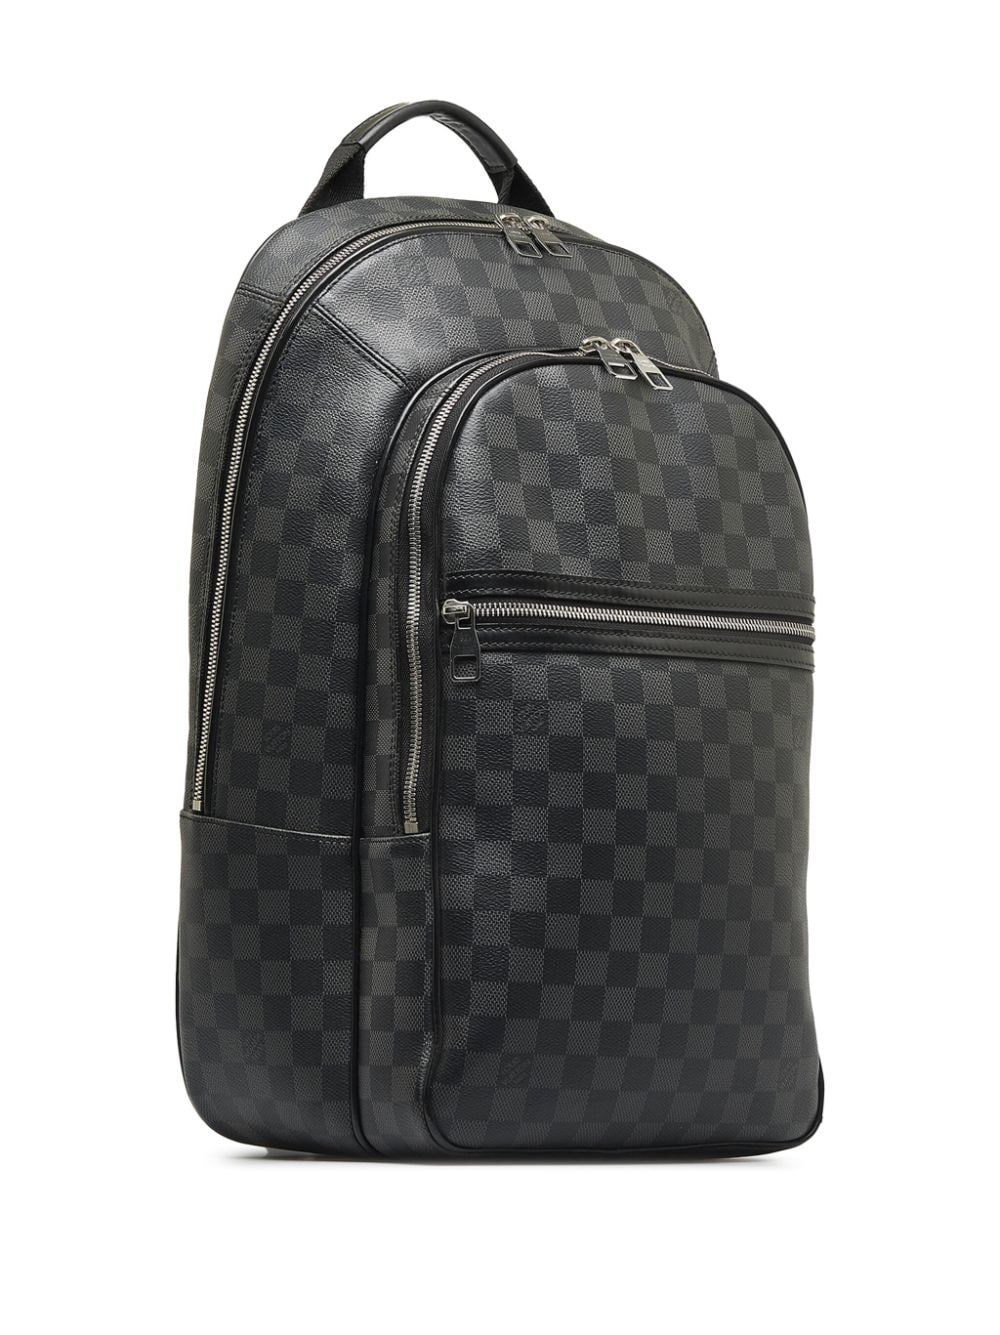 Louis Vuitton pre-owned Damier Graphite Michael Backpack - Farfetch